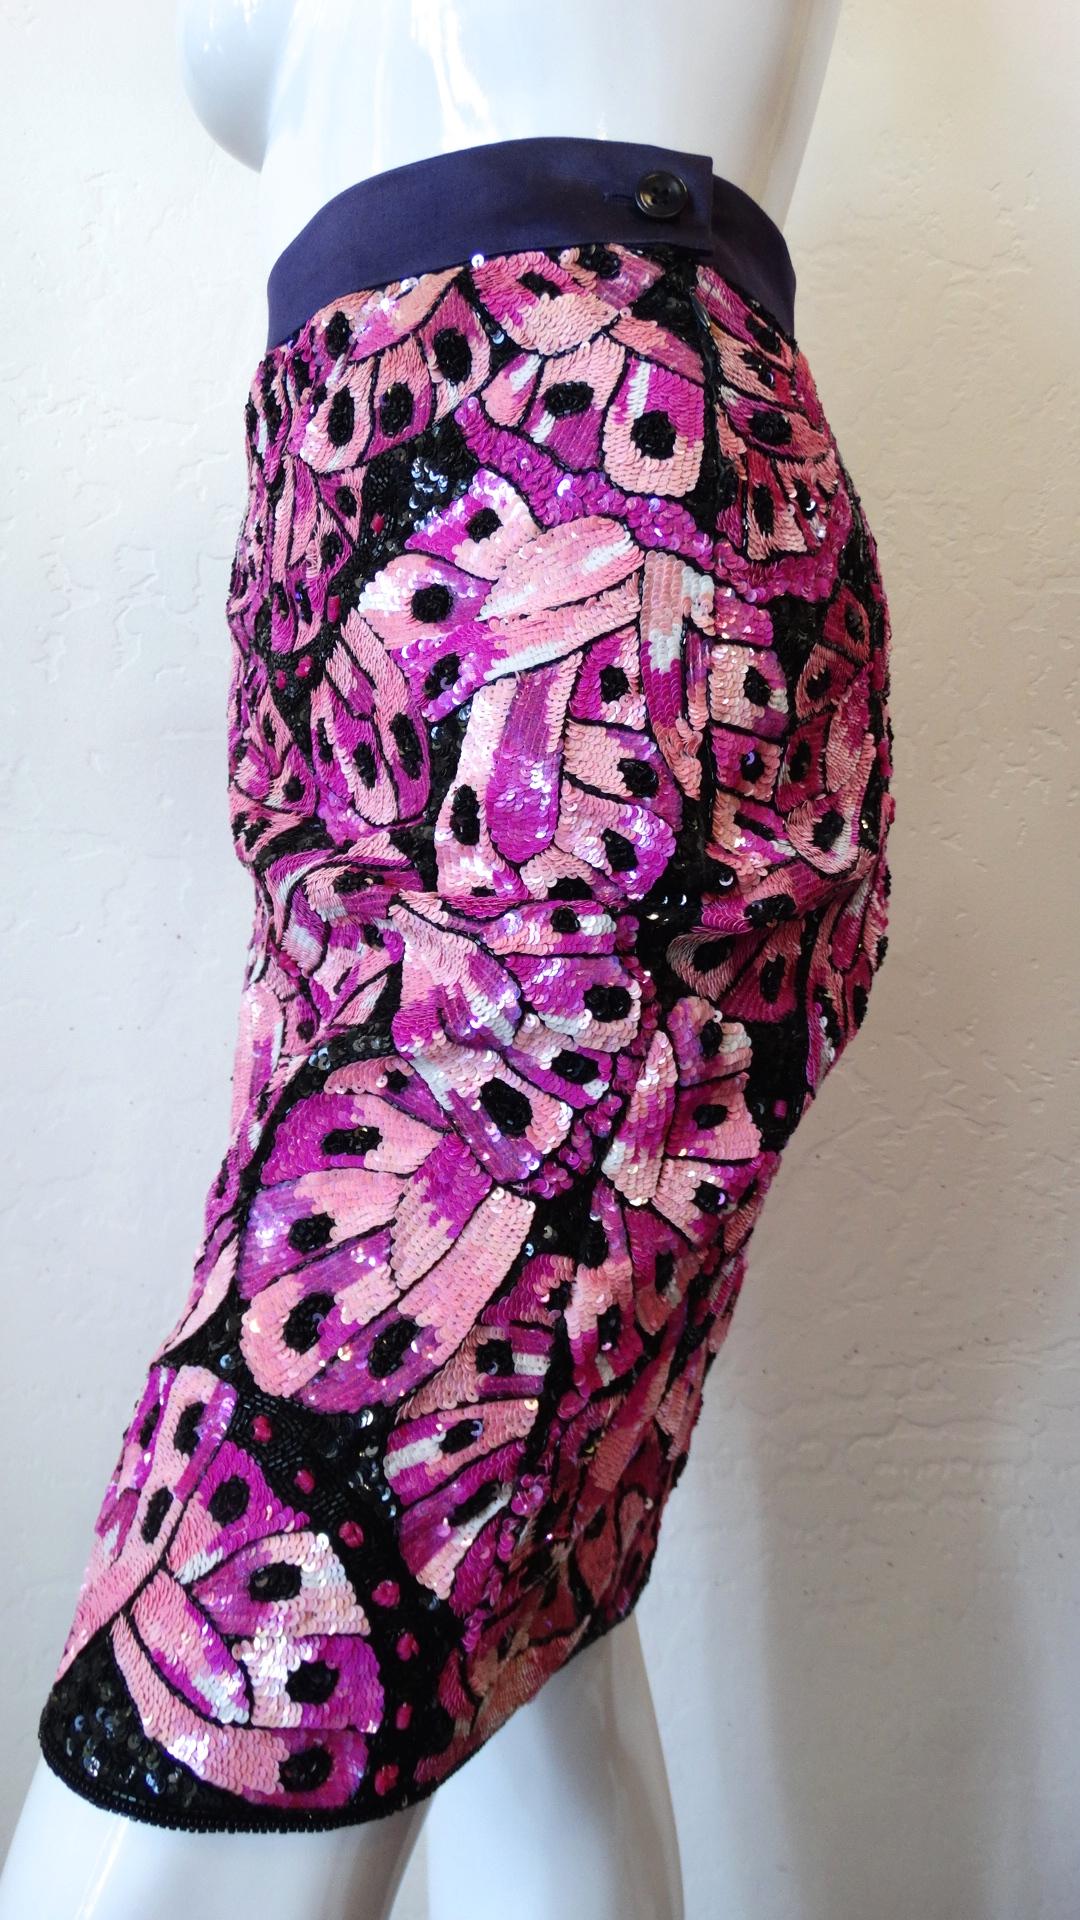 Add some sparkle to your summer wardrobe with our oh-so-sequined 1980s Escada Couture pencil skirt! Purple satin skirt absolutely covered in pink, magenta and black sequins in a butterfly wing pattern! Flattering fitted silhouette with pencil style